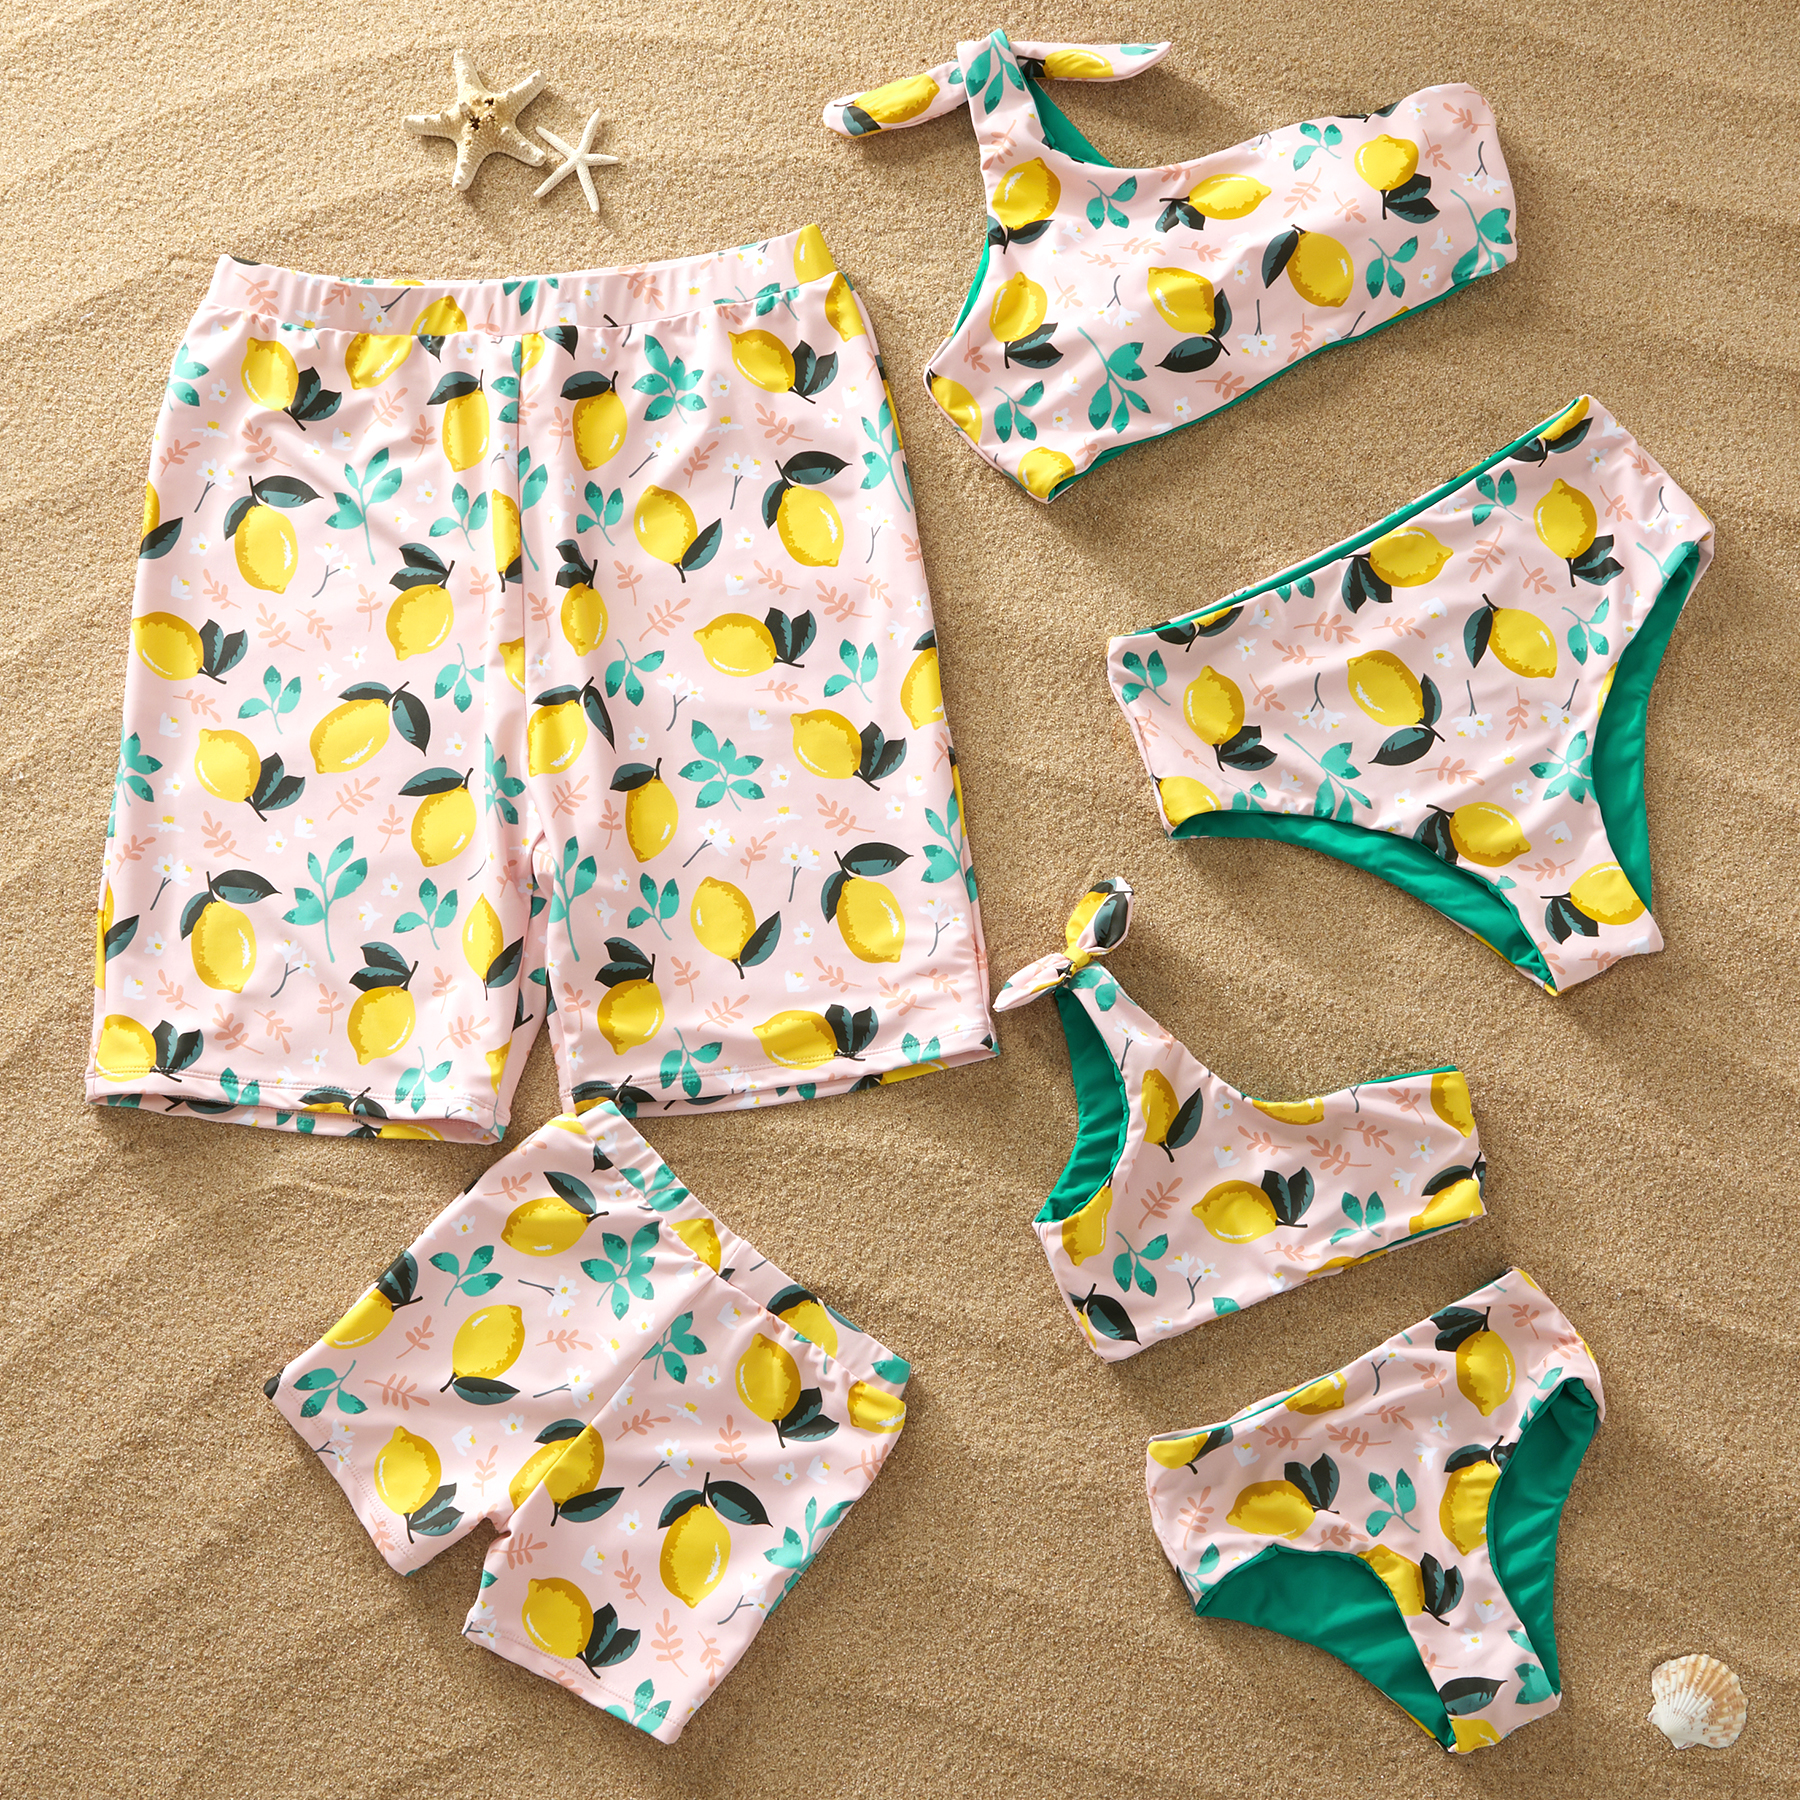 Reversible Lemon Print or Solid Green Family Swimsuits